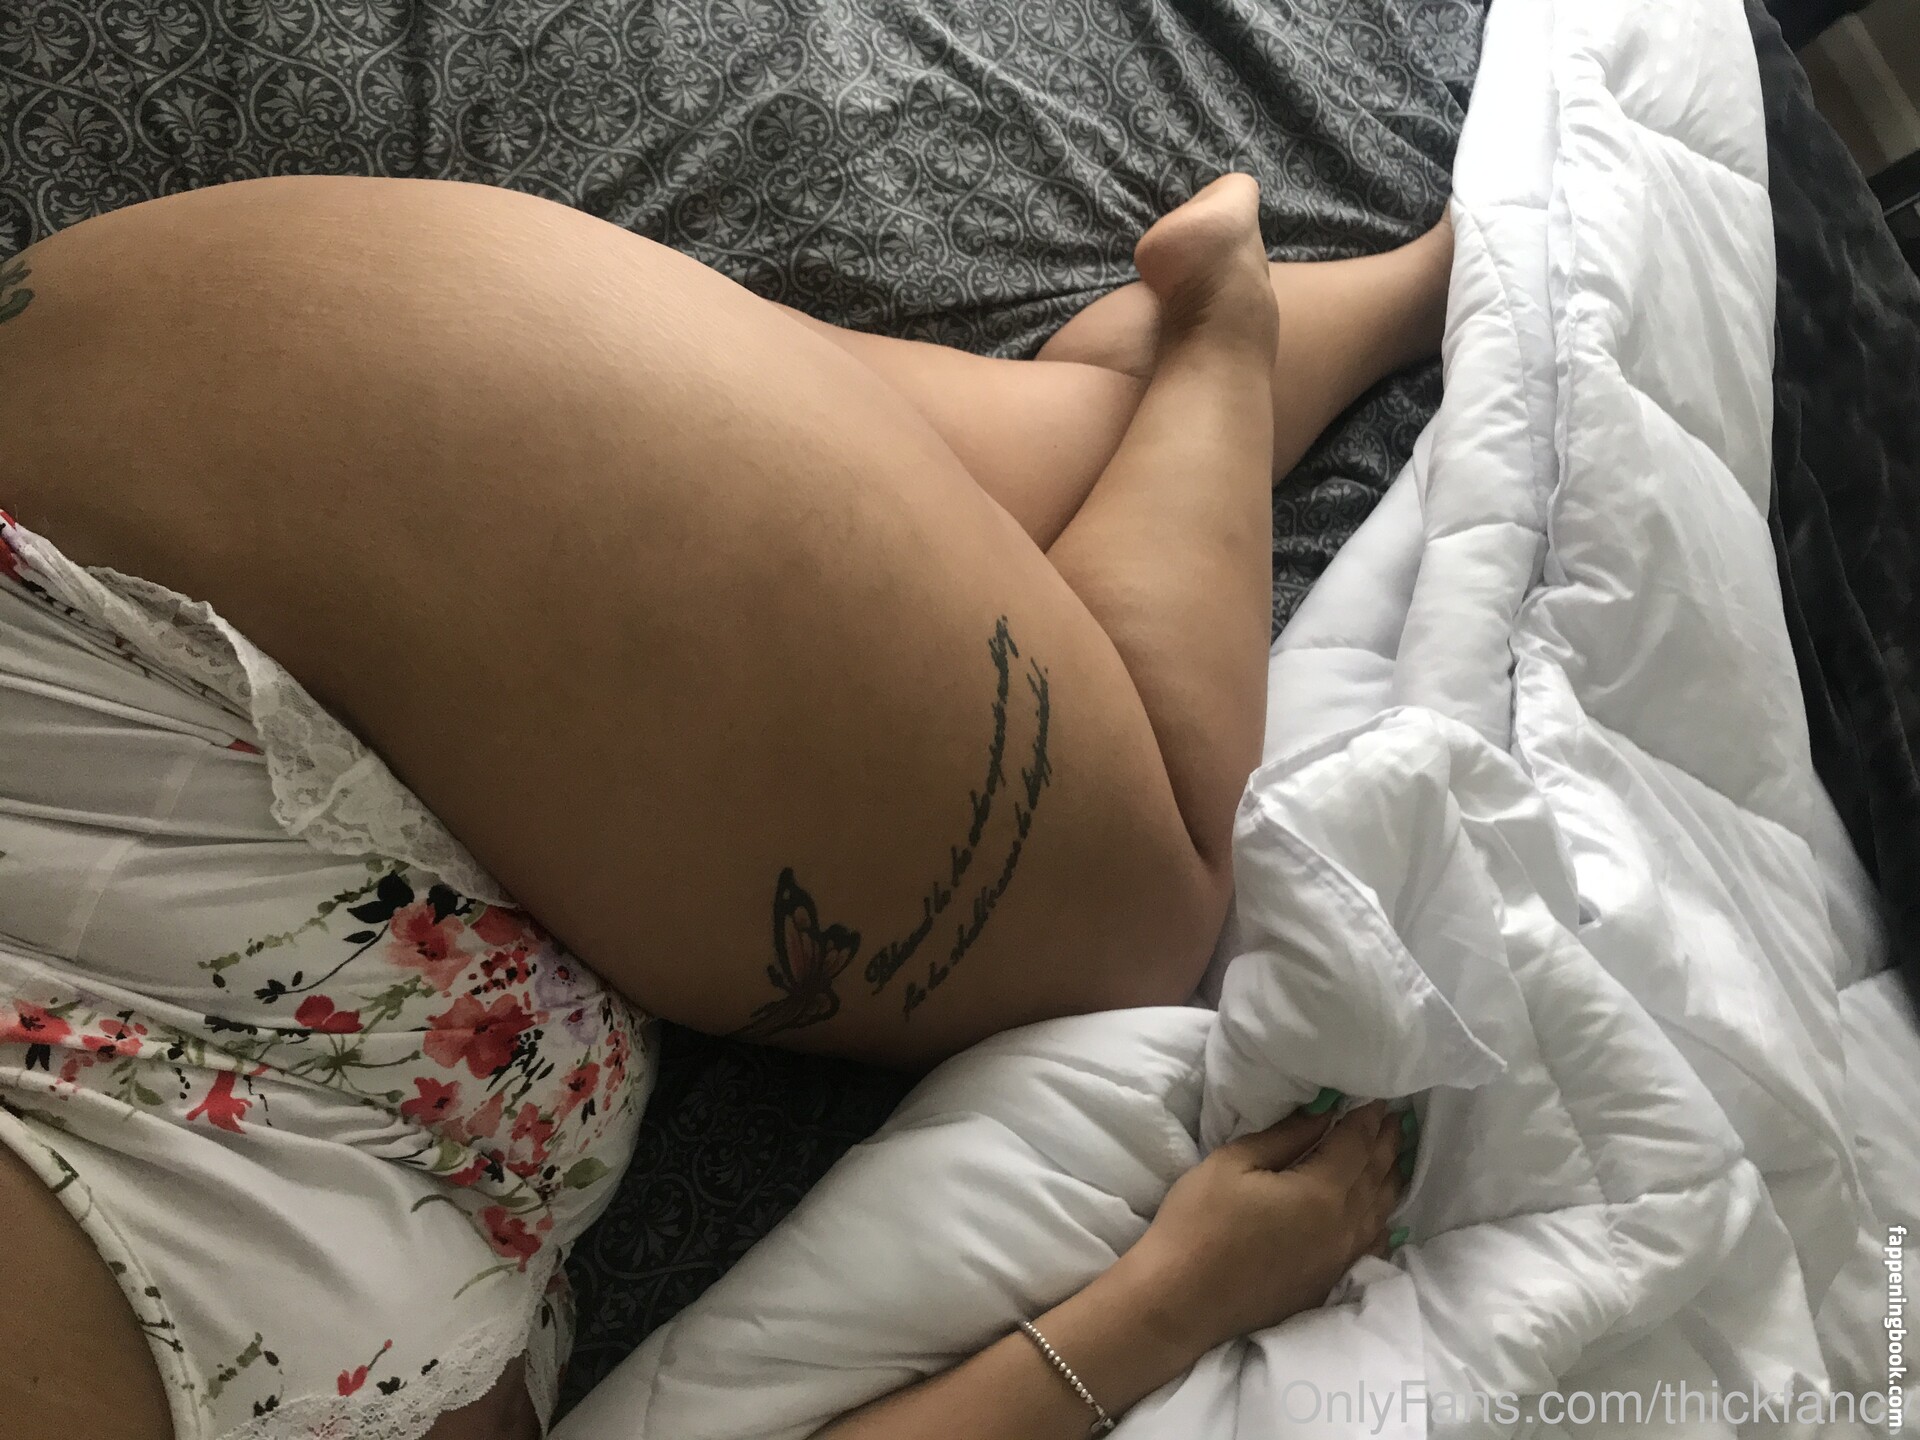 thickfancy onlyfans the fappening fappeningbook